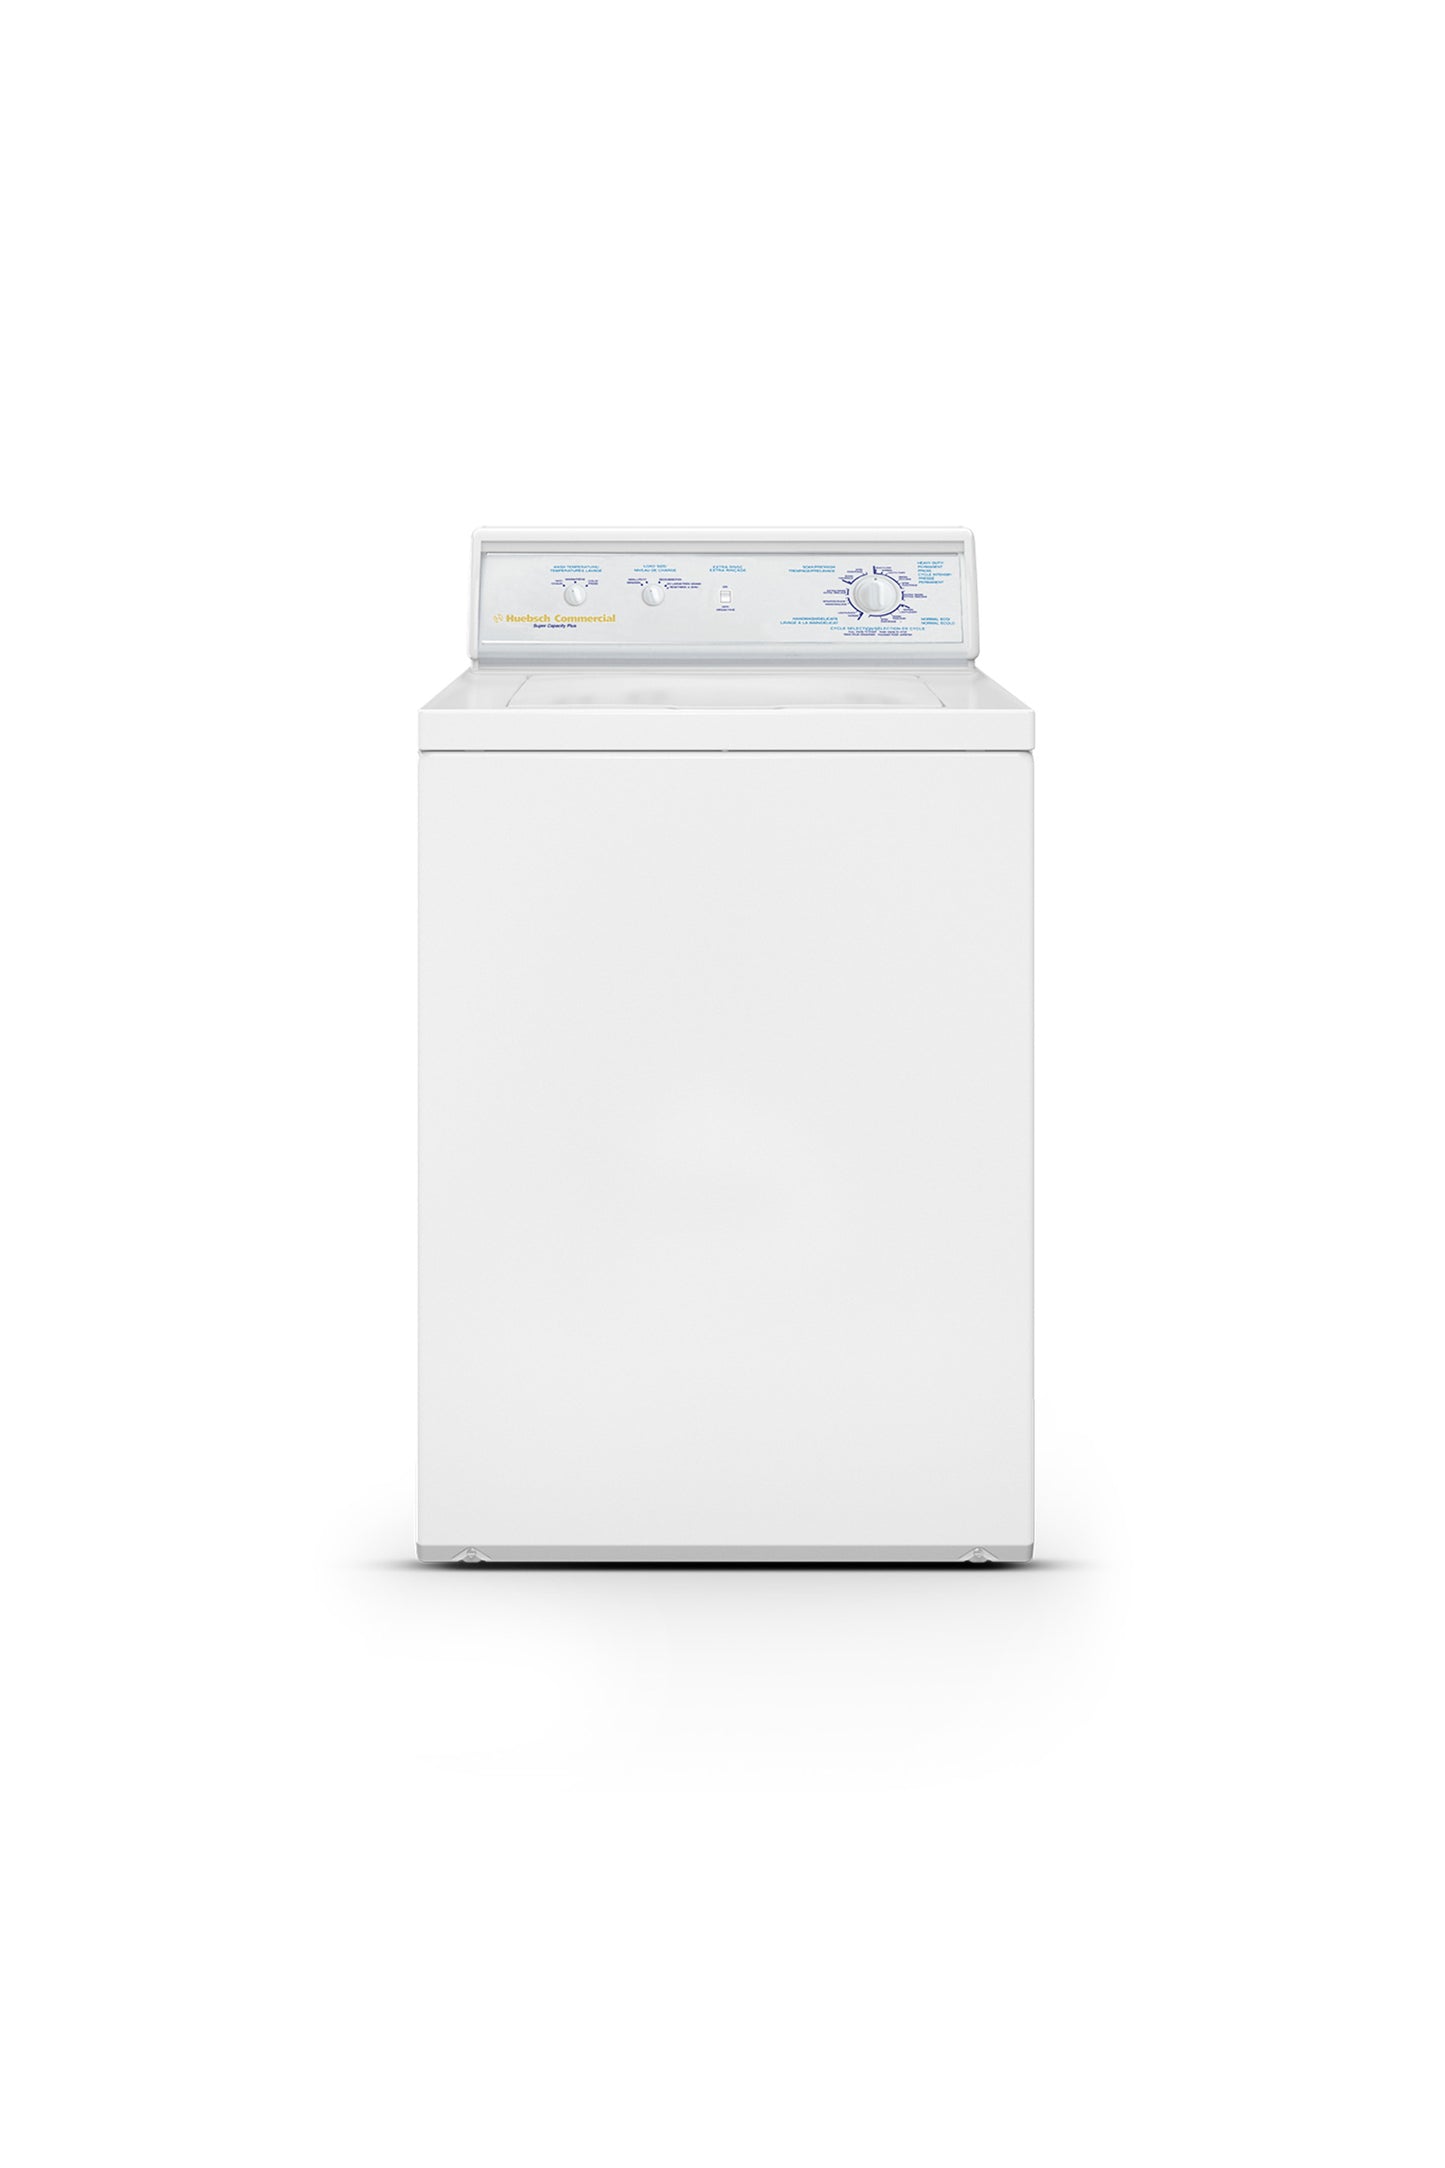 ON-PREMISE TOP LOAD WASHER - MECHANICAL